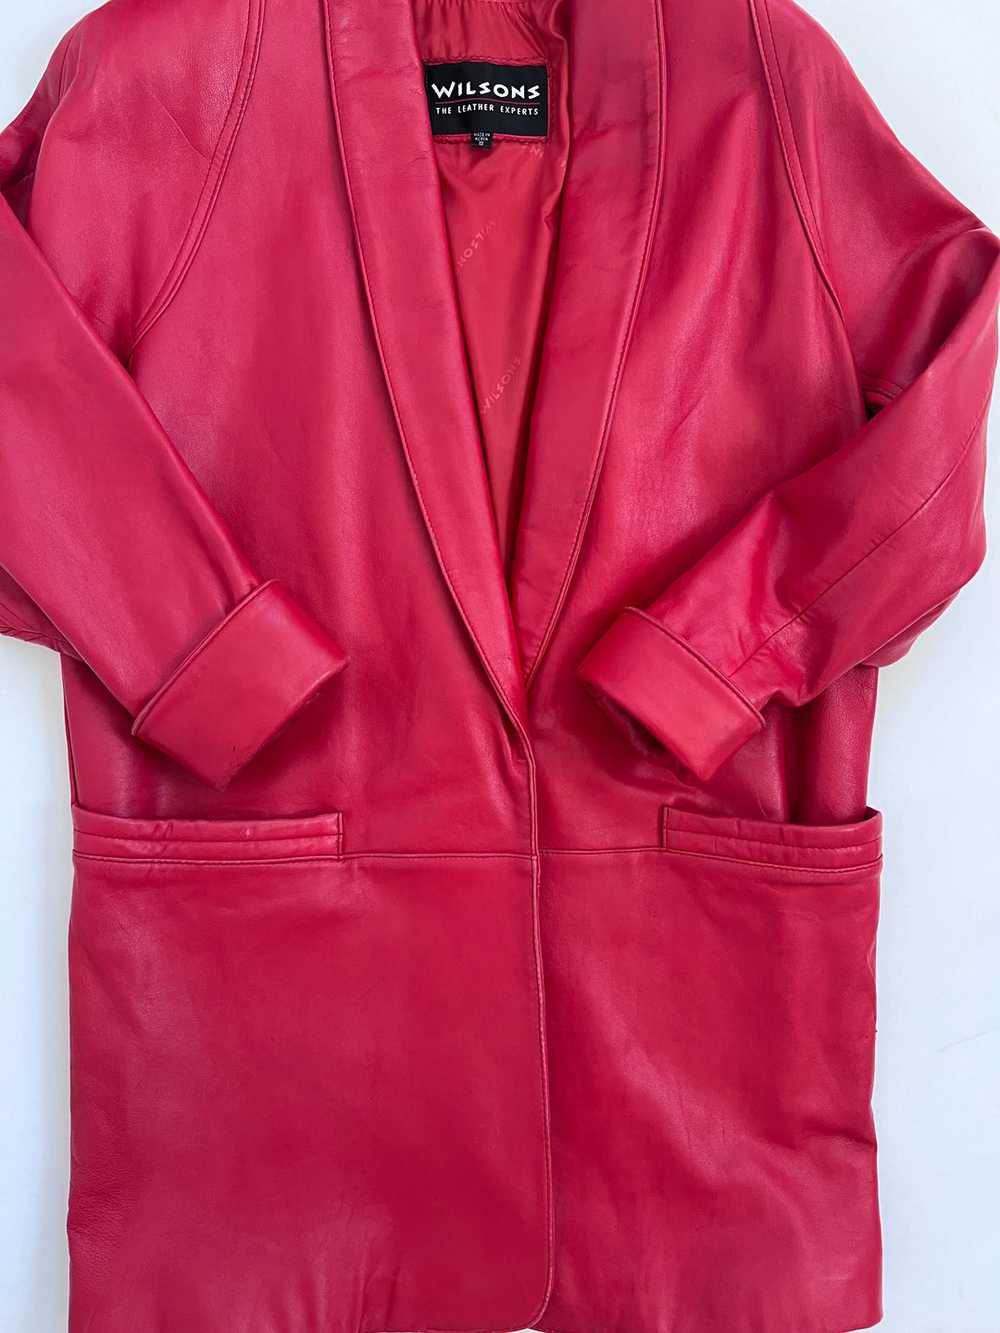 Red Leather Jacket - image 8